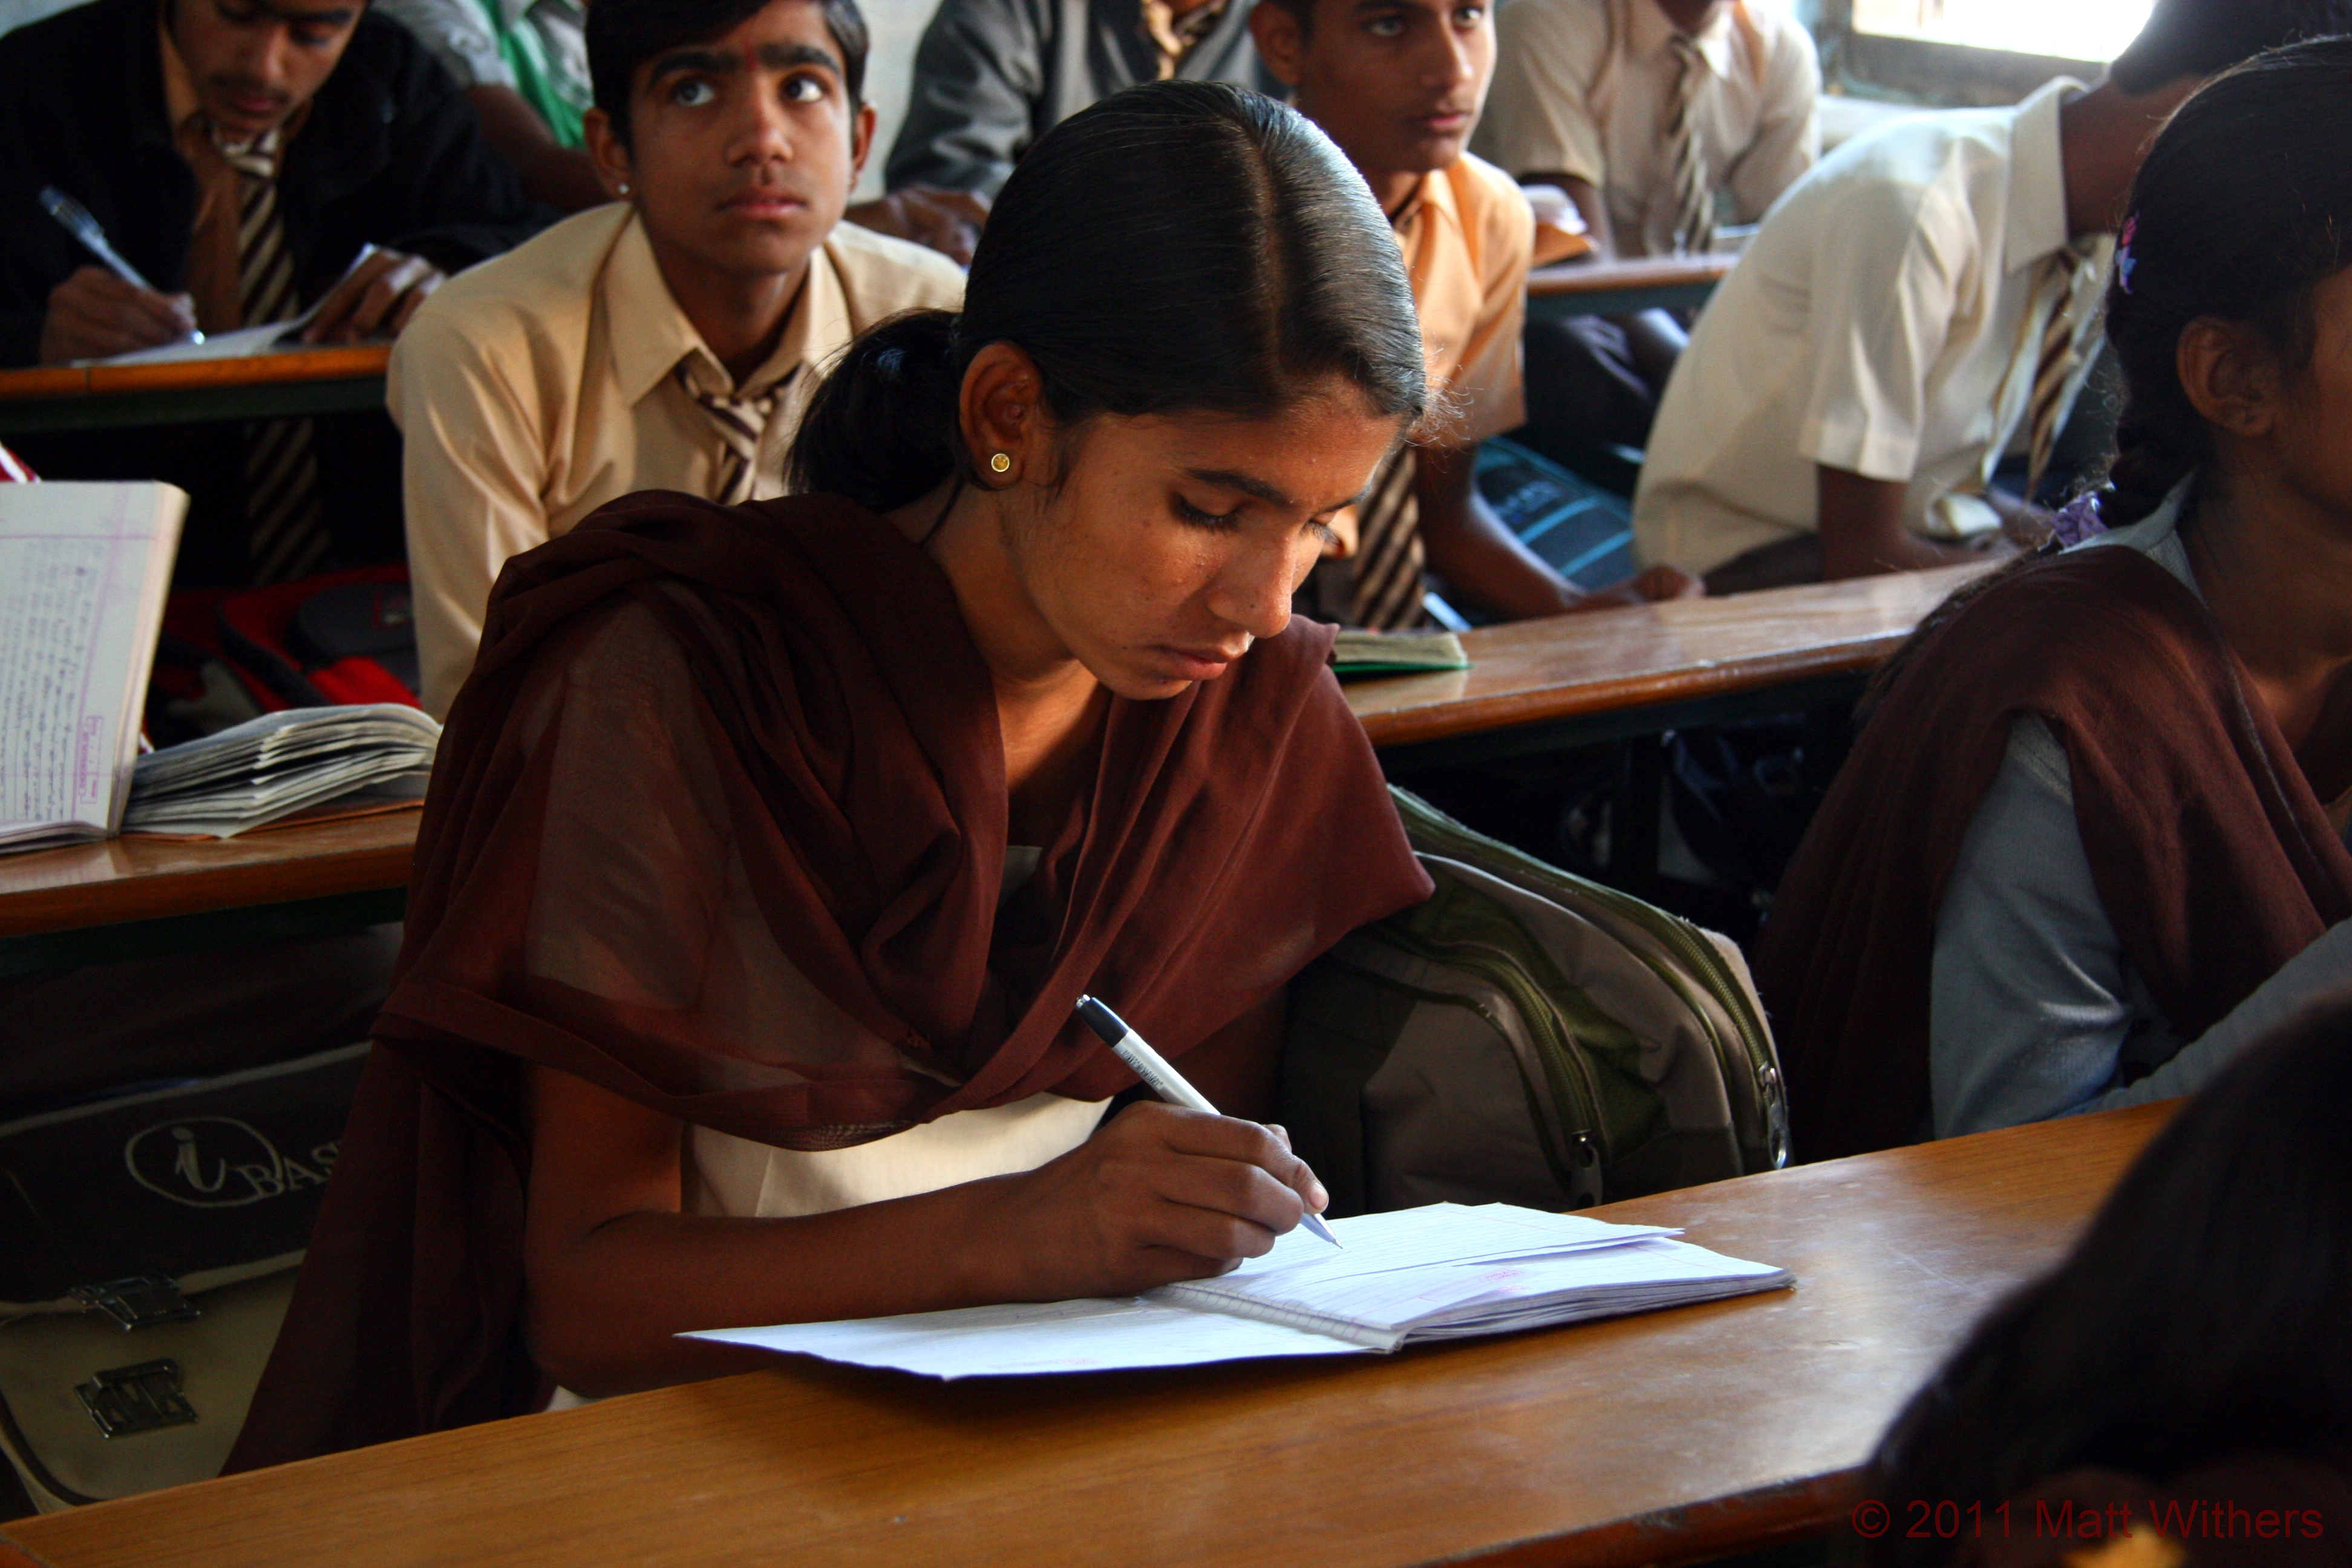 A young girl hard at work during her lesson at school